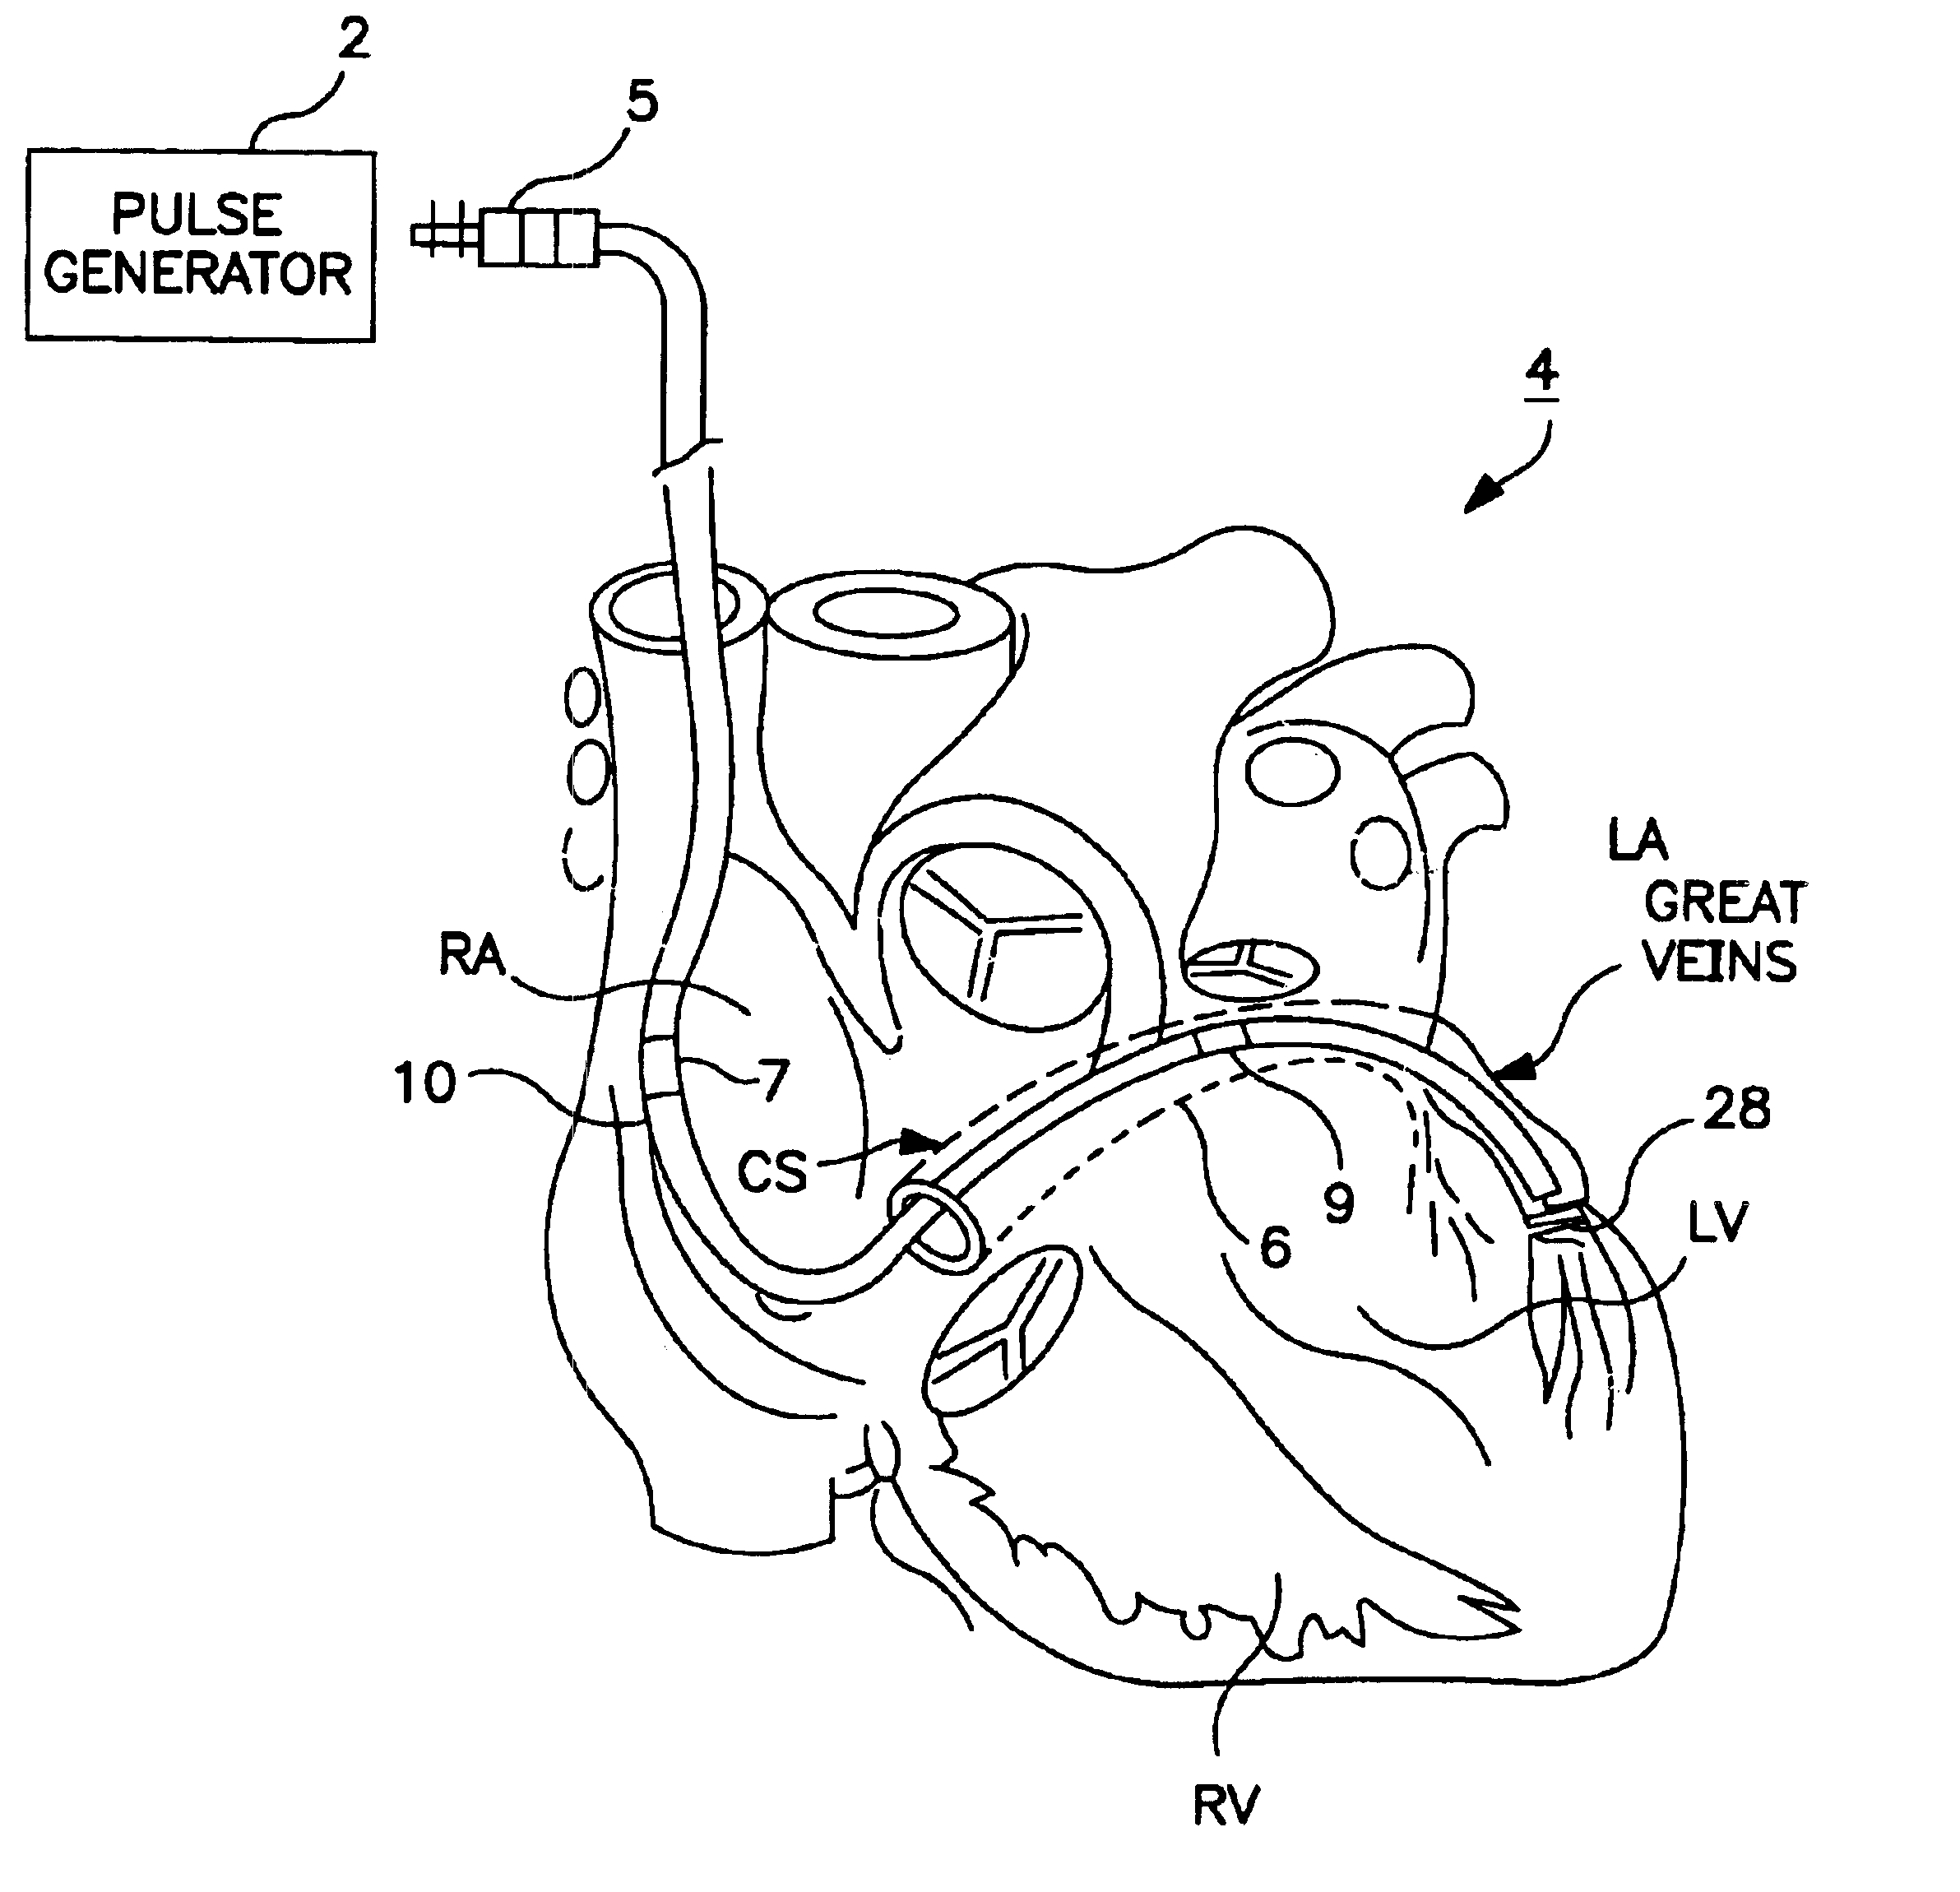 System and method for positioning an implantable medical device within a body